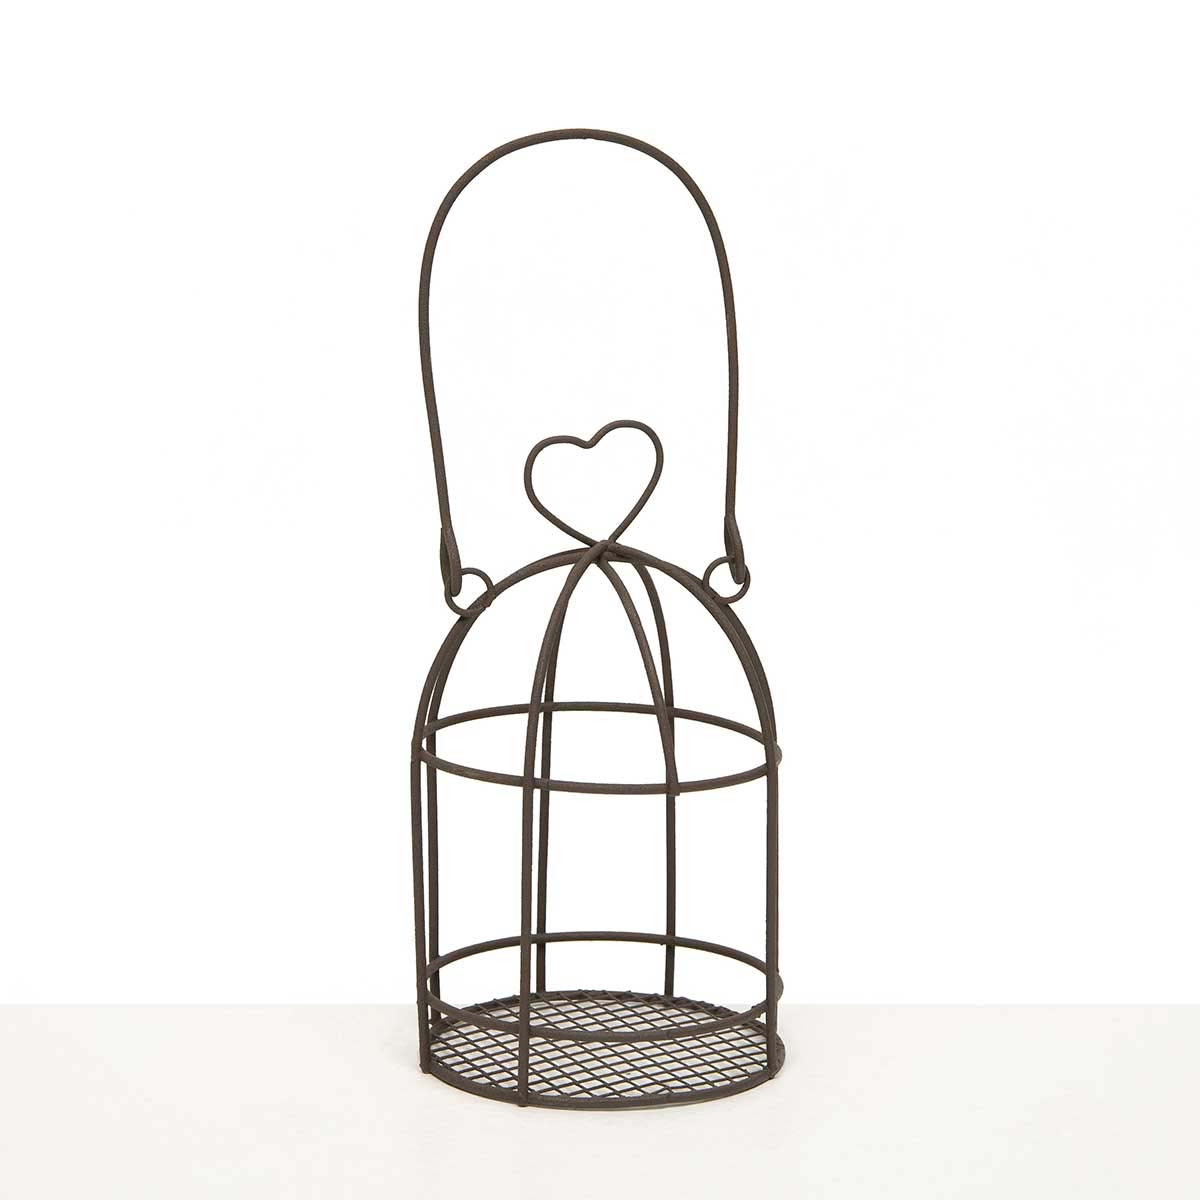 BIRD CAGE VOTIVE HOLDER HEART 3IN X 5IN BROWN METAL - Click Image to Close